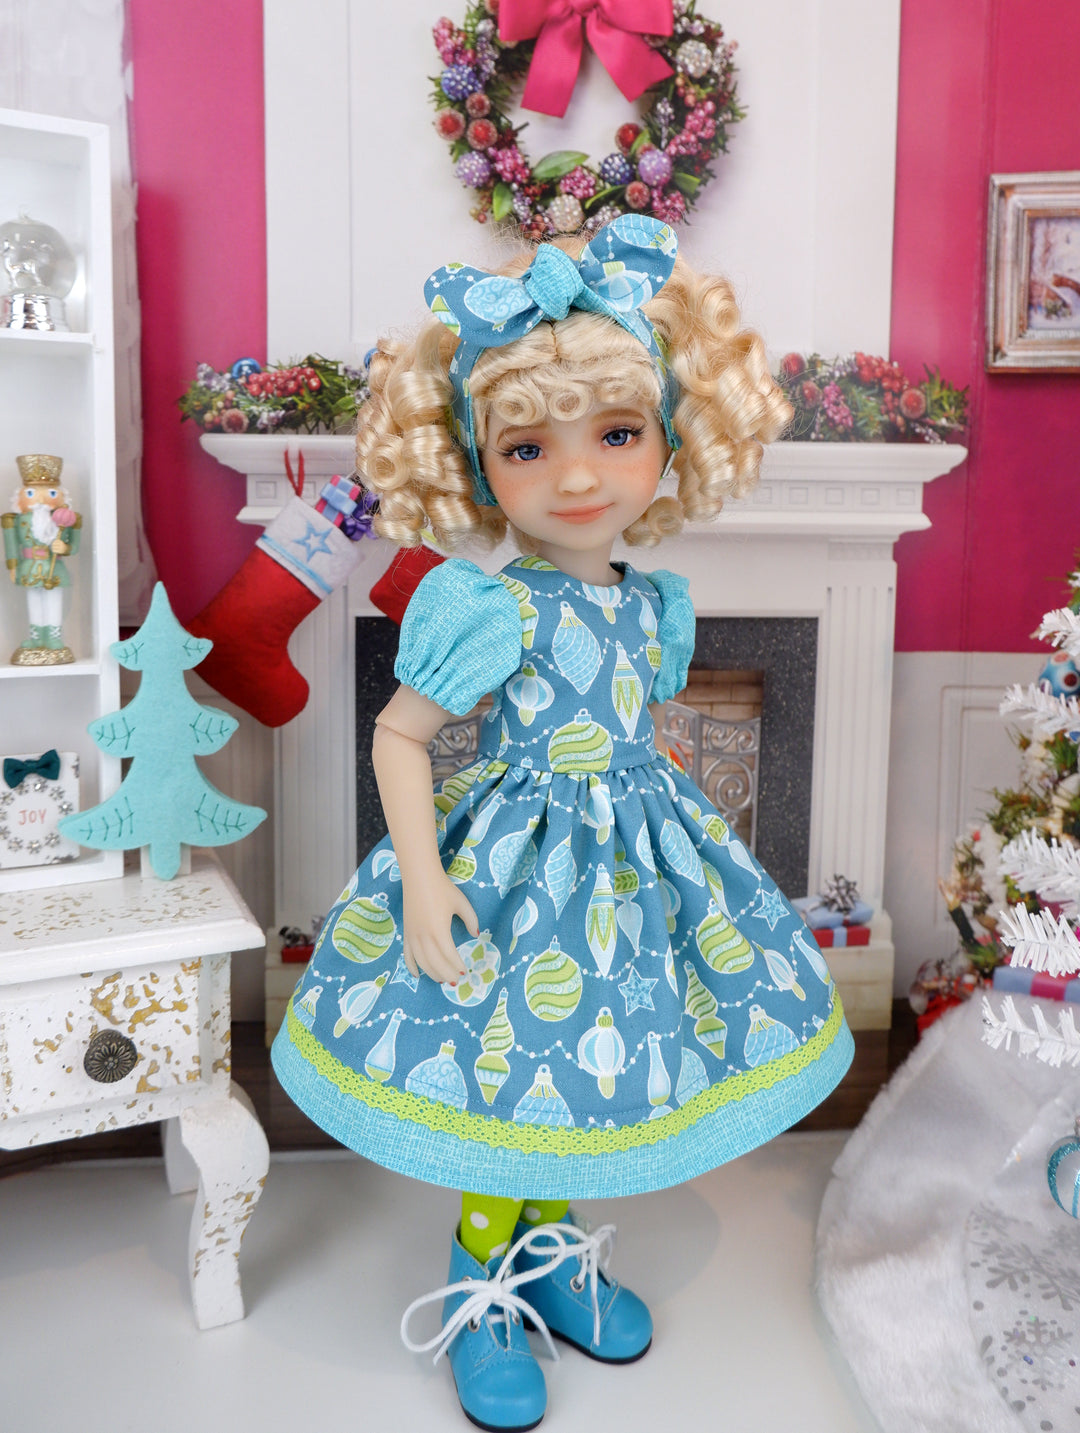 Decorative Ornaments - dress and boots for Ruby Red Fashion Friends doll